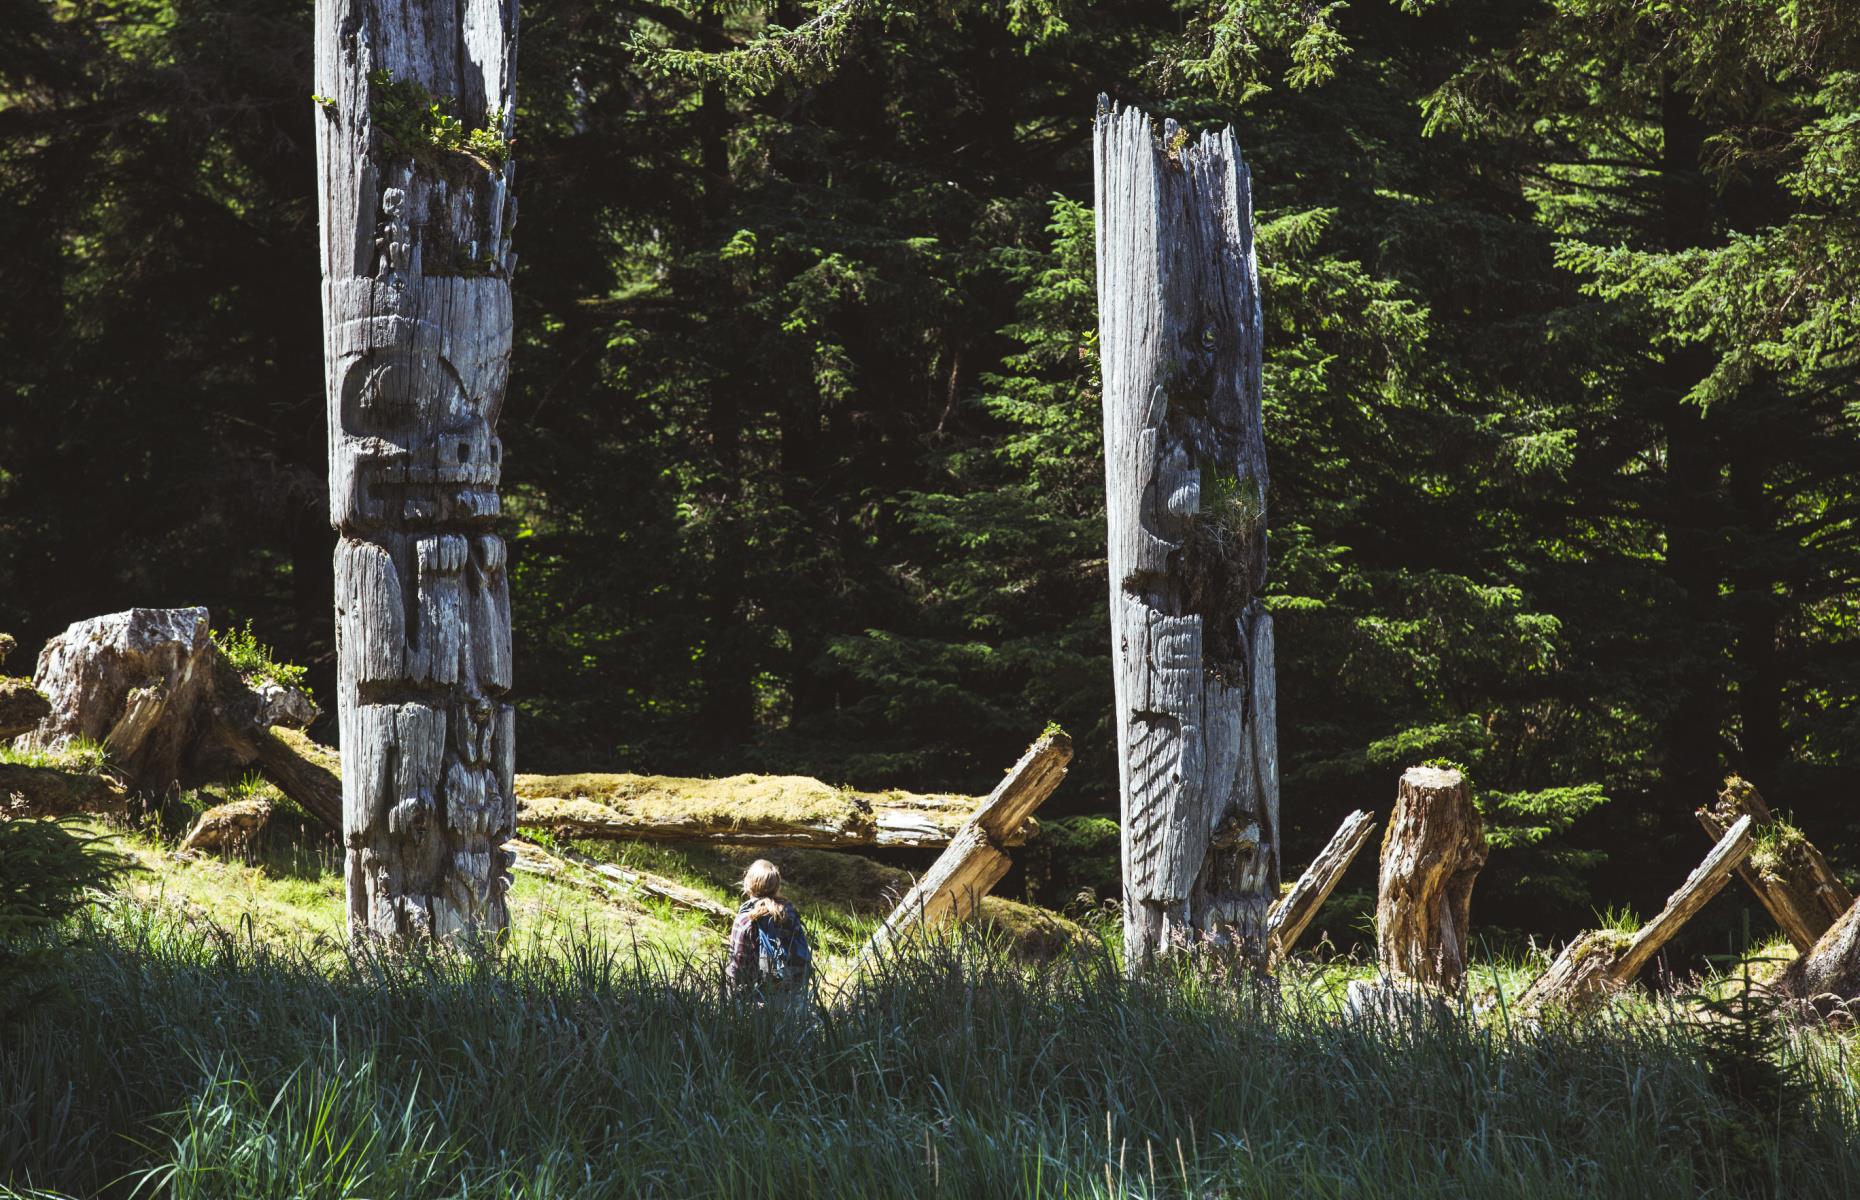 <p><a href="https://parks.canada.ca/pn-np/bc/gwaiihaanas/info/histoire-history">The establishment of the reserve</a> began with a dispute in the 1970s, when residents protested plans for logging developments on traditional Haida lands on Moresby Island. In 1993, the Government of Canada signed an agreement with the Council of the Haida Nation that led to the formation of a management board including equal Government of Canada and Haida Nation representation. It’s widely viewed as a top example of how Parks Canada and Indigenous groups can manage a park together.</p>